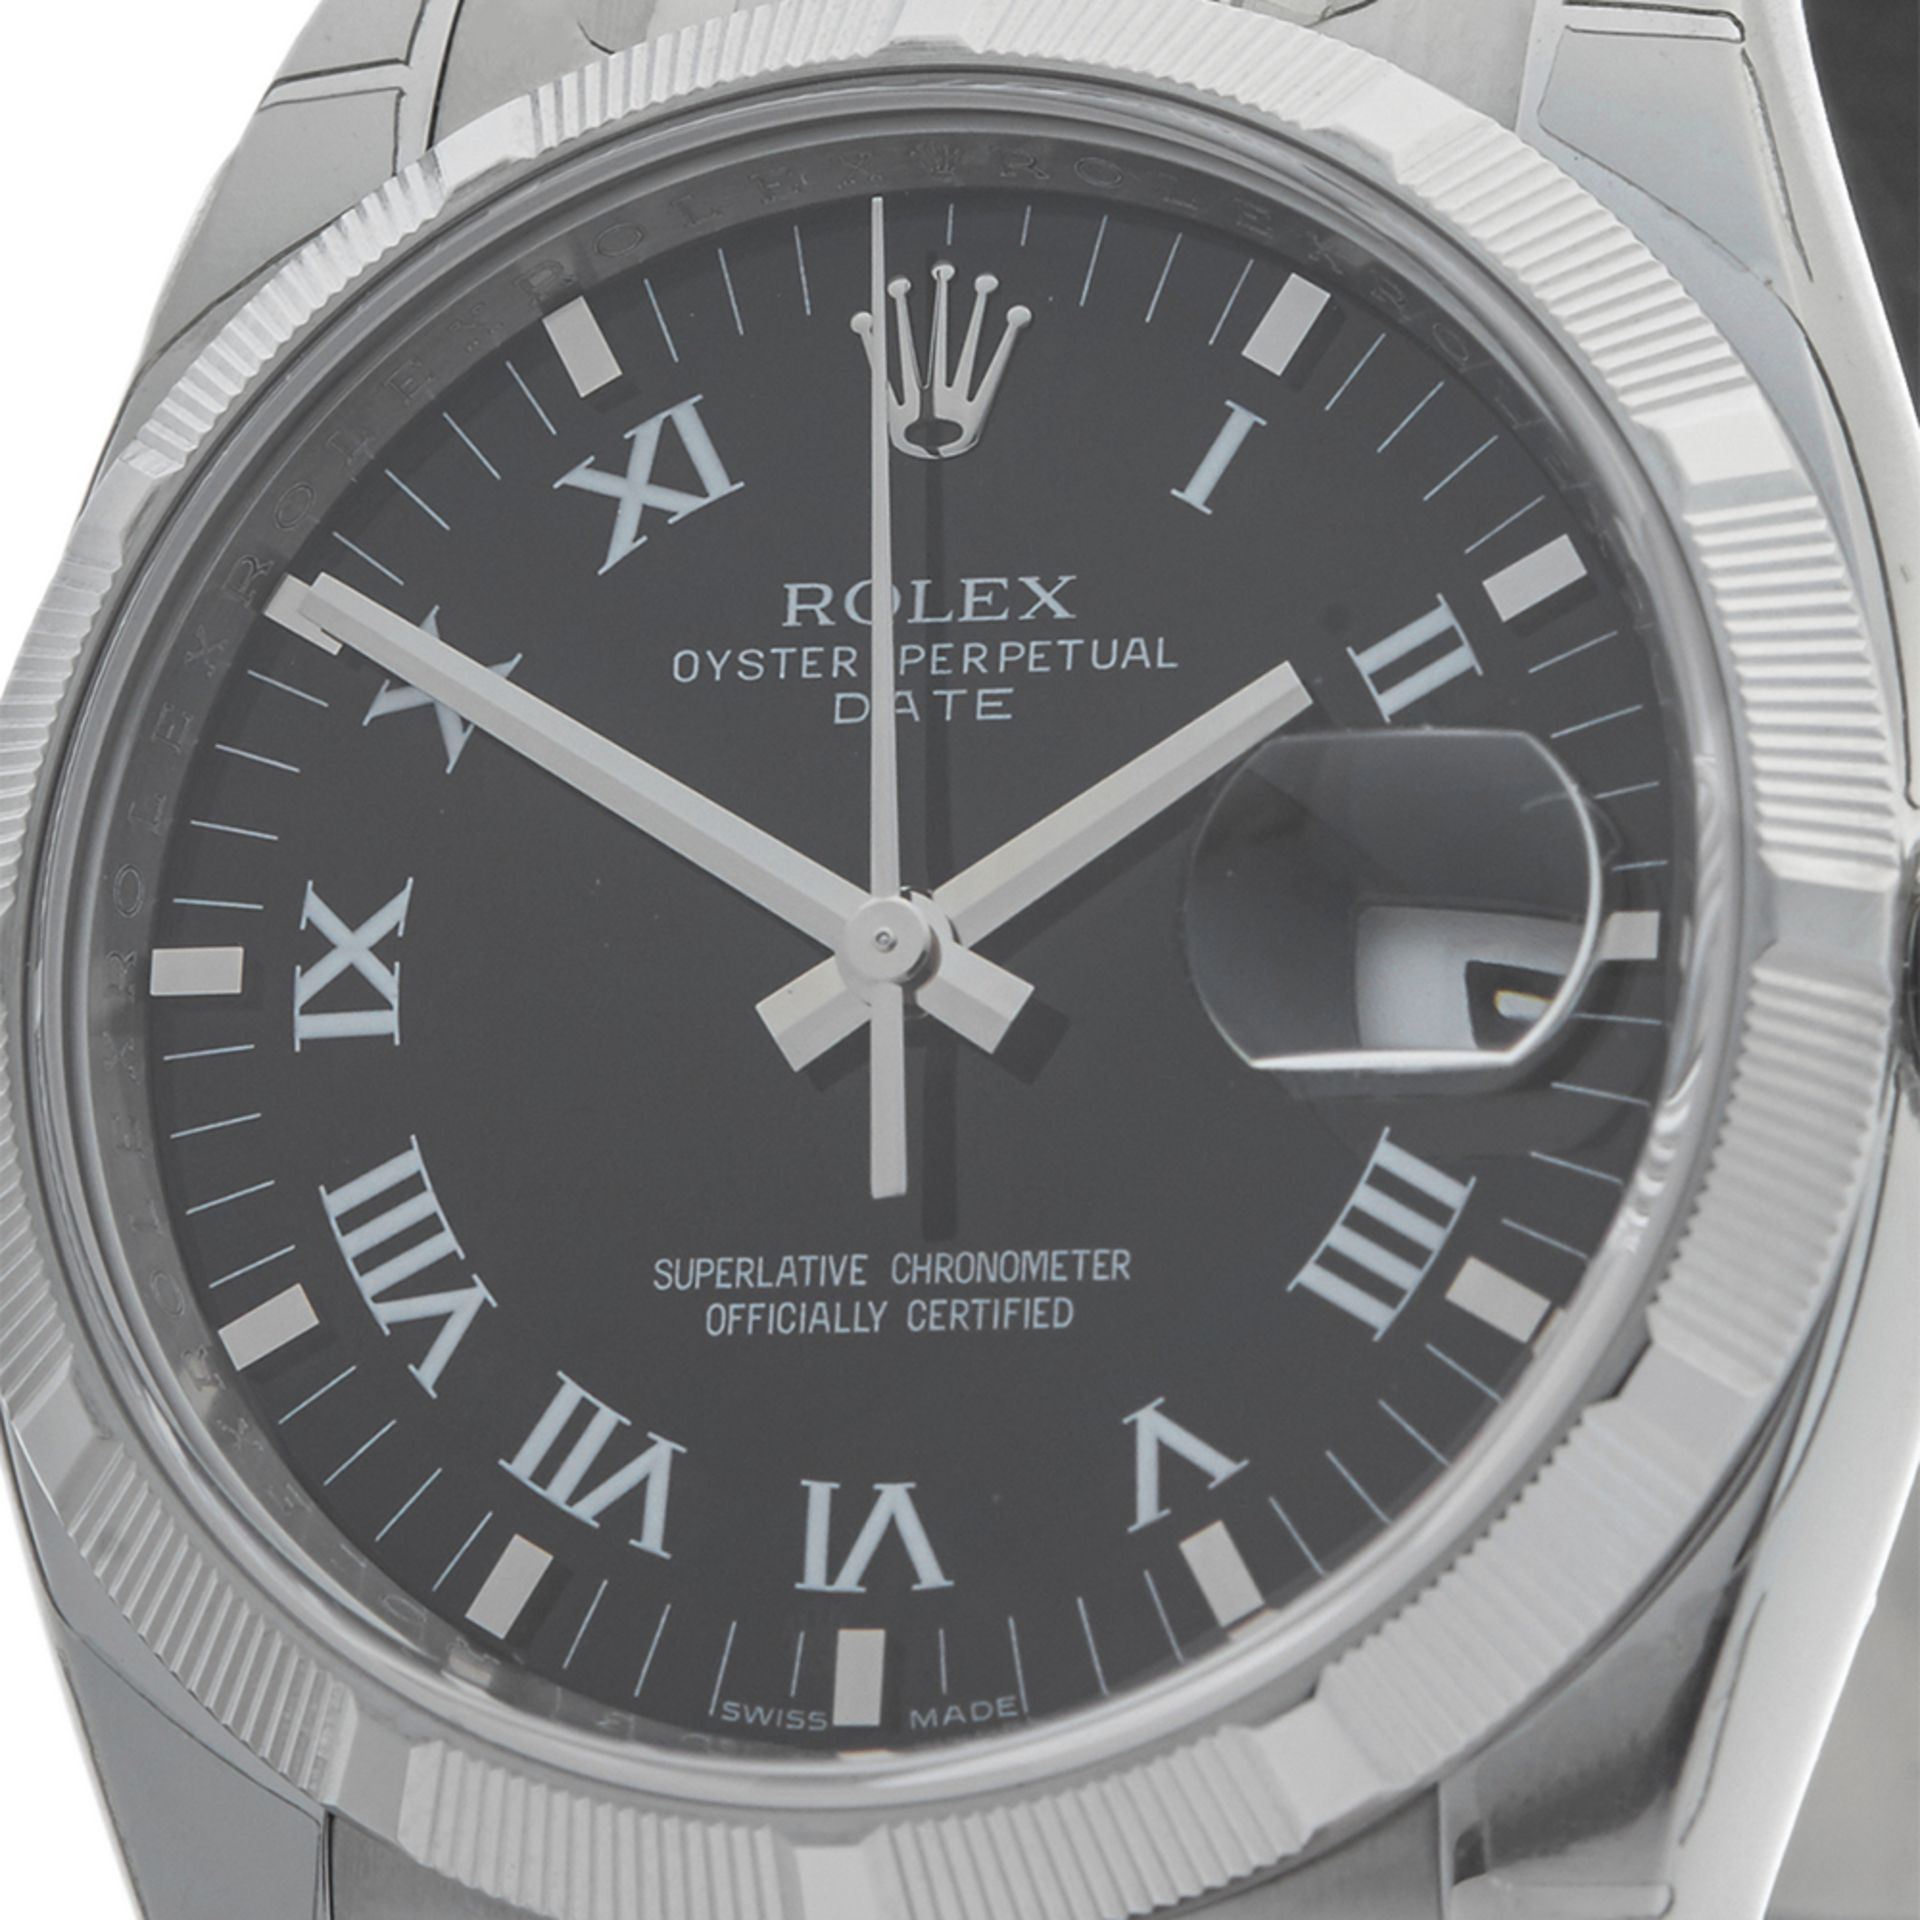 Oyster Perpetual Date 34mm Stainless Steel - 115210 - Image 3 of 9